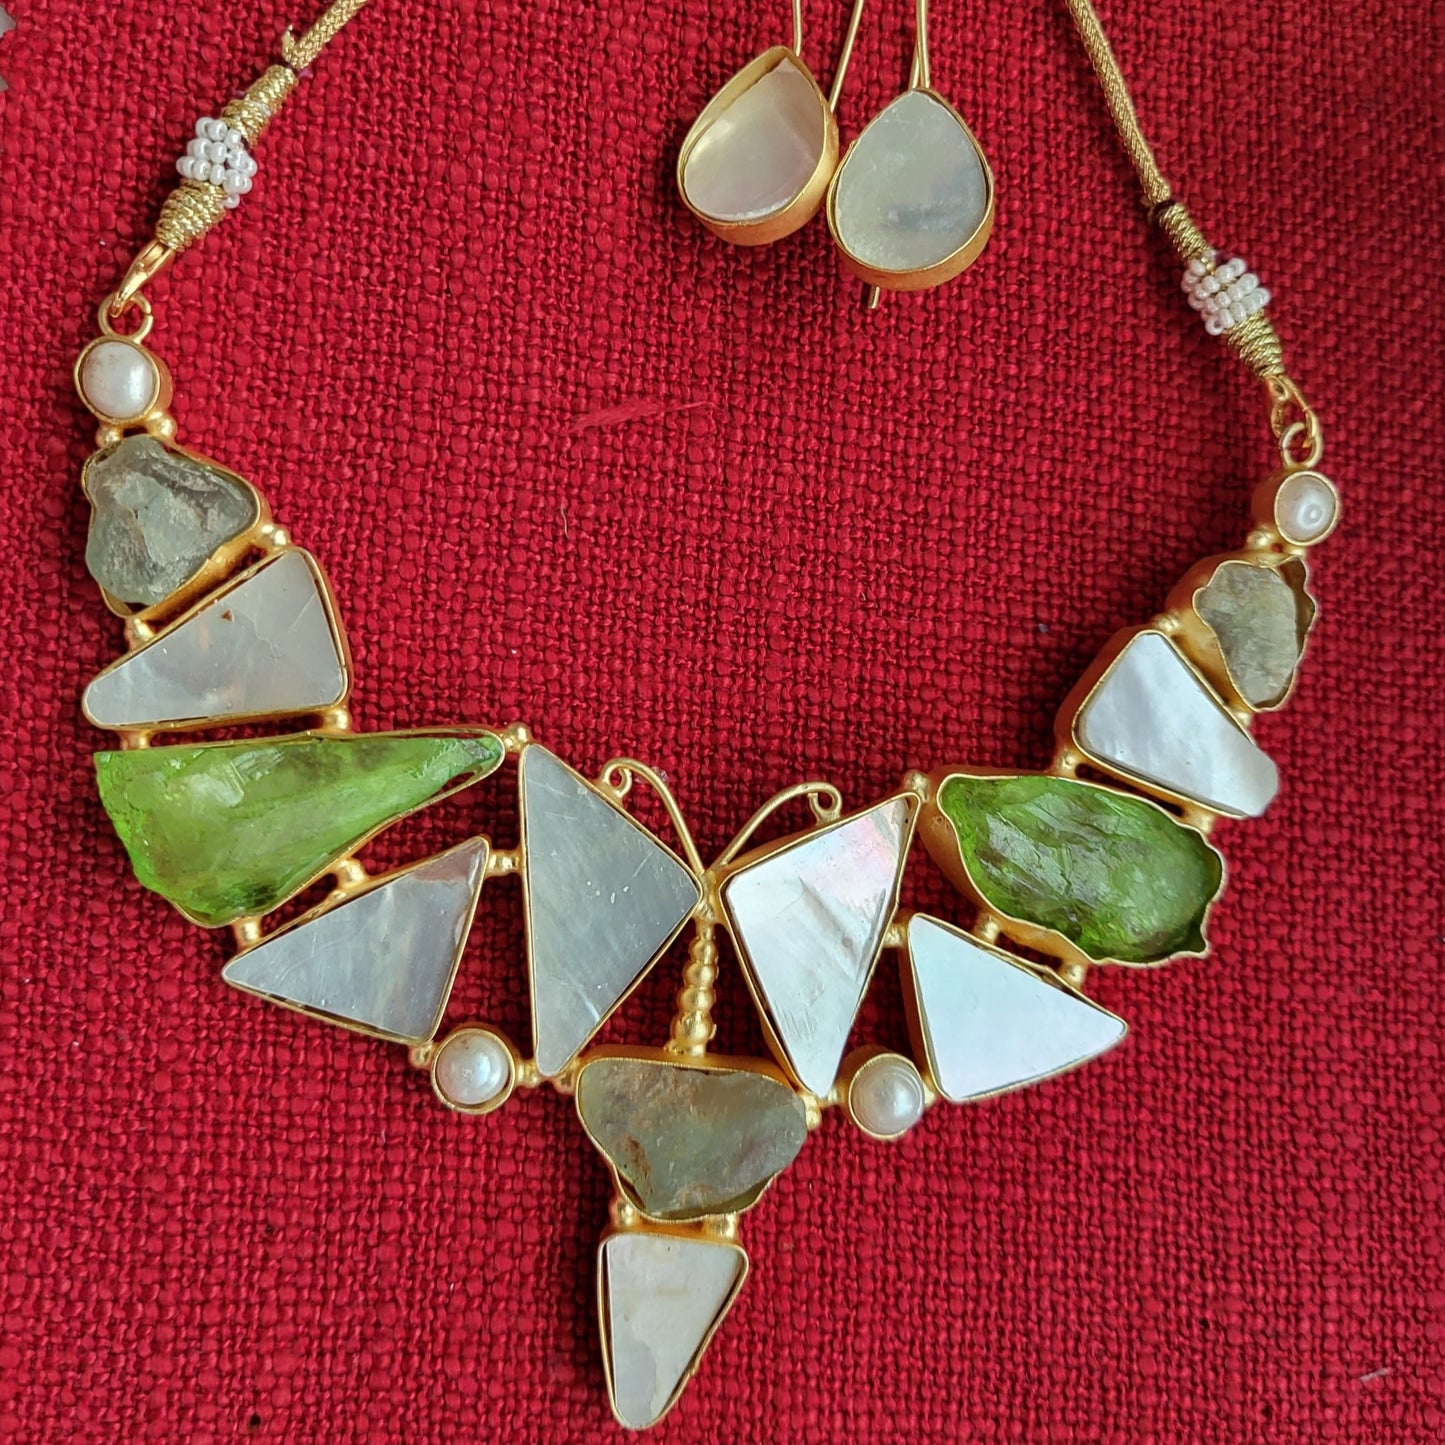 Moonstone, green uncut stones and a butterfly